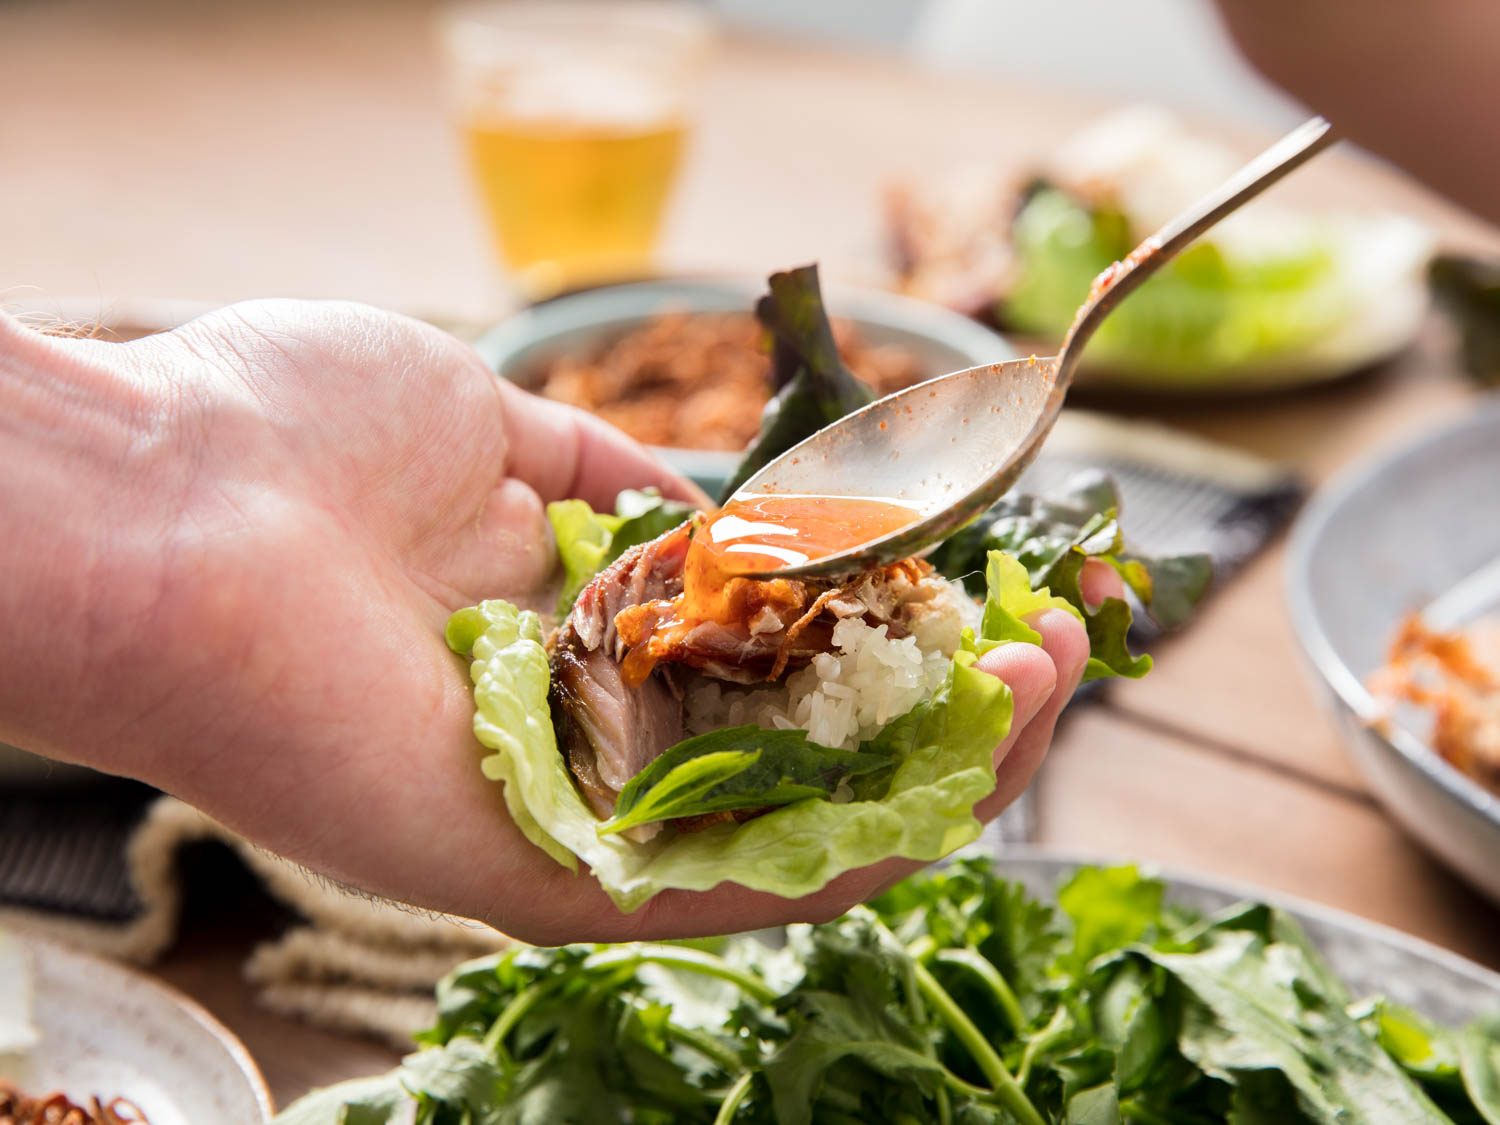 Spooning dipping sauce over a lettuce wrap with pork, sticky rice, and herbs.